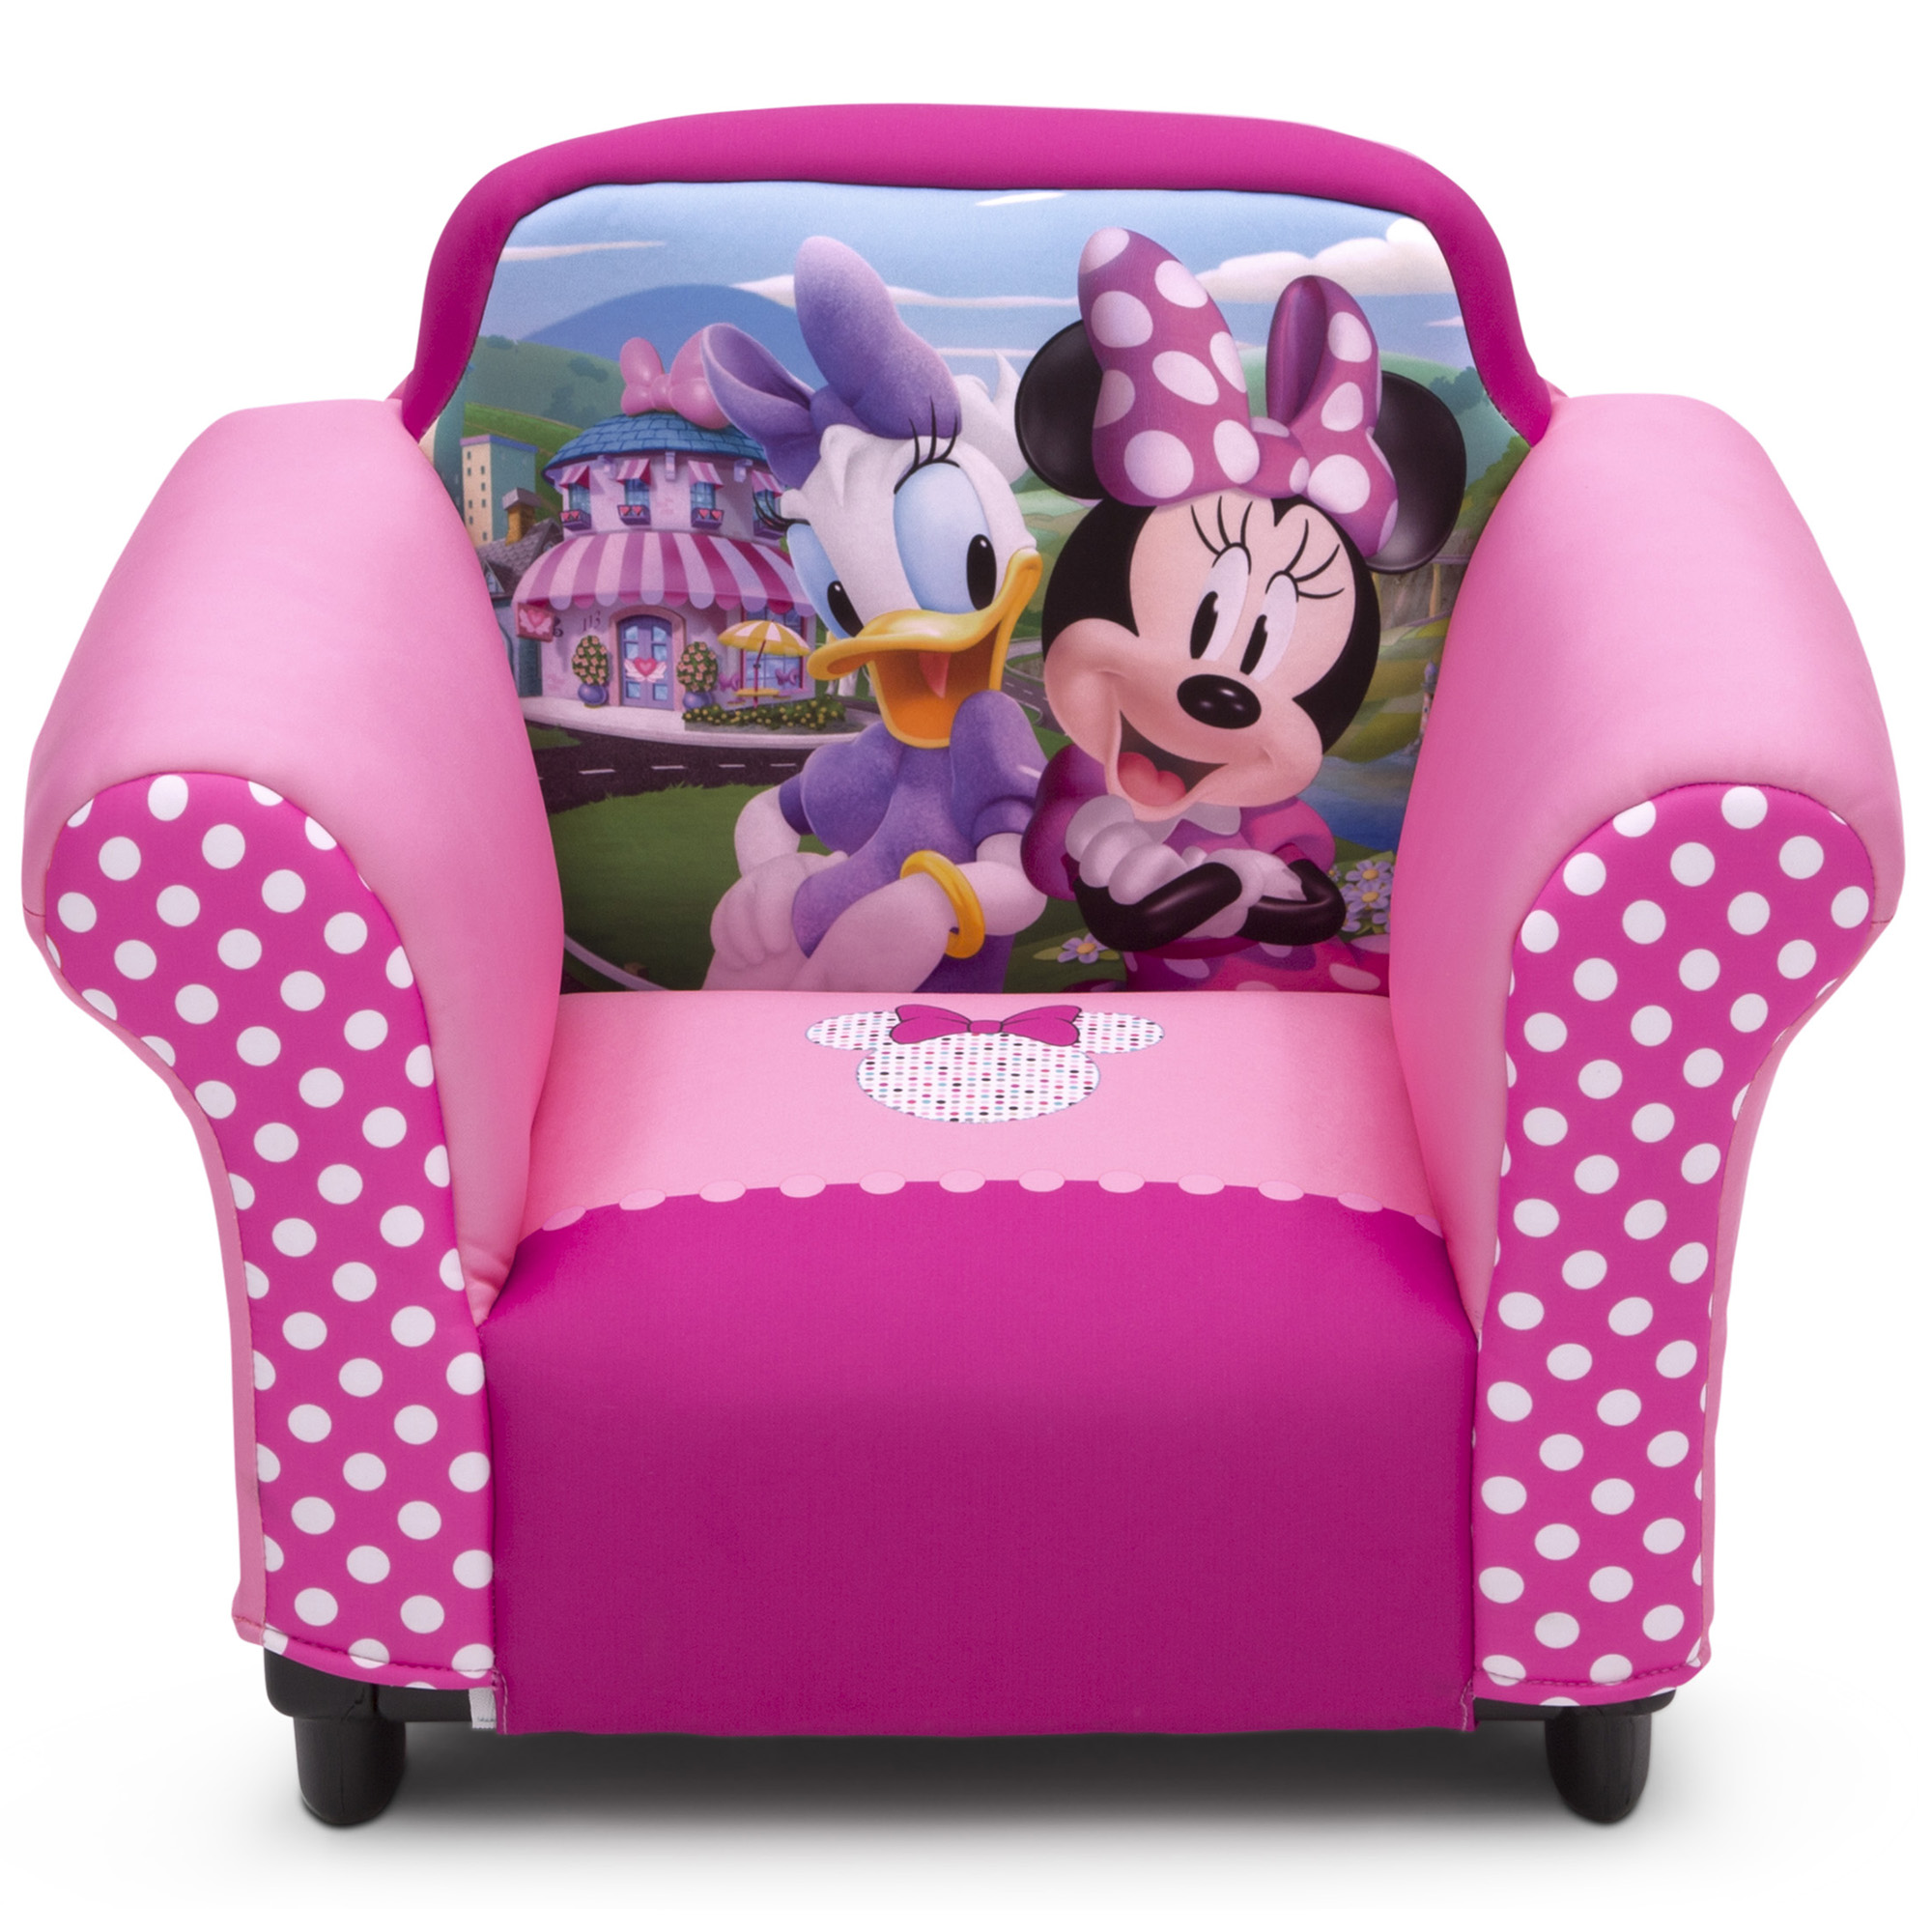 Delta Children Disney Minnie Mouse Kids Upholstered Chair with Sculpted Plastic Frame - image 1 of 6